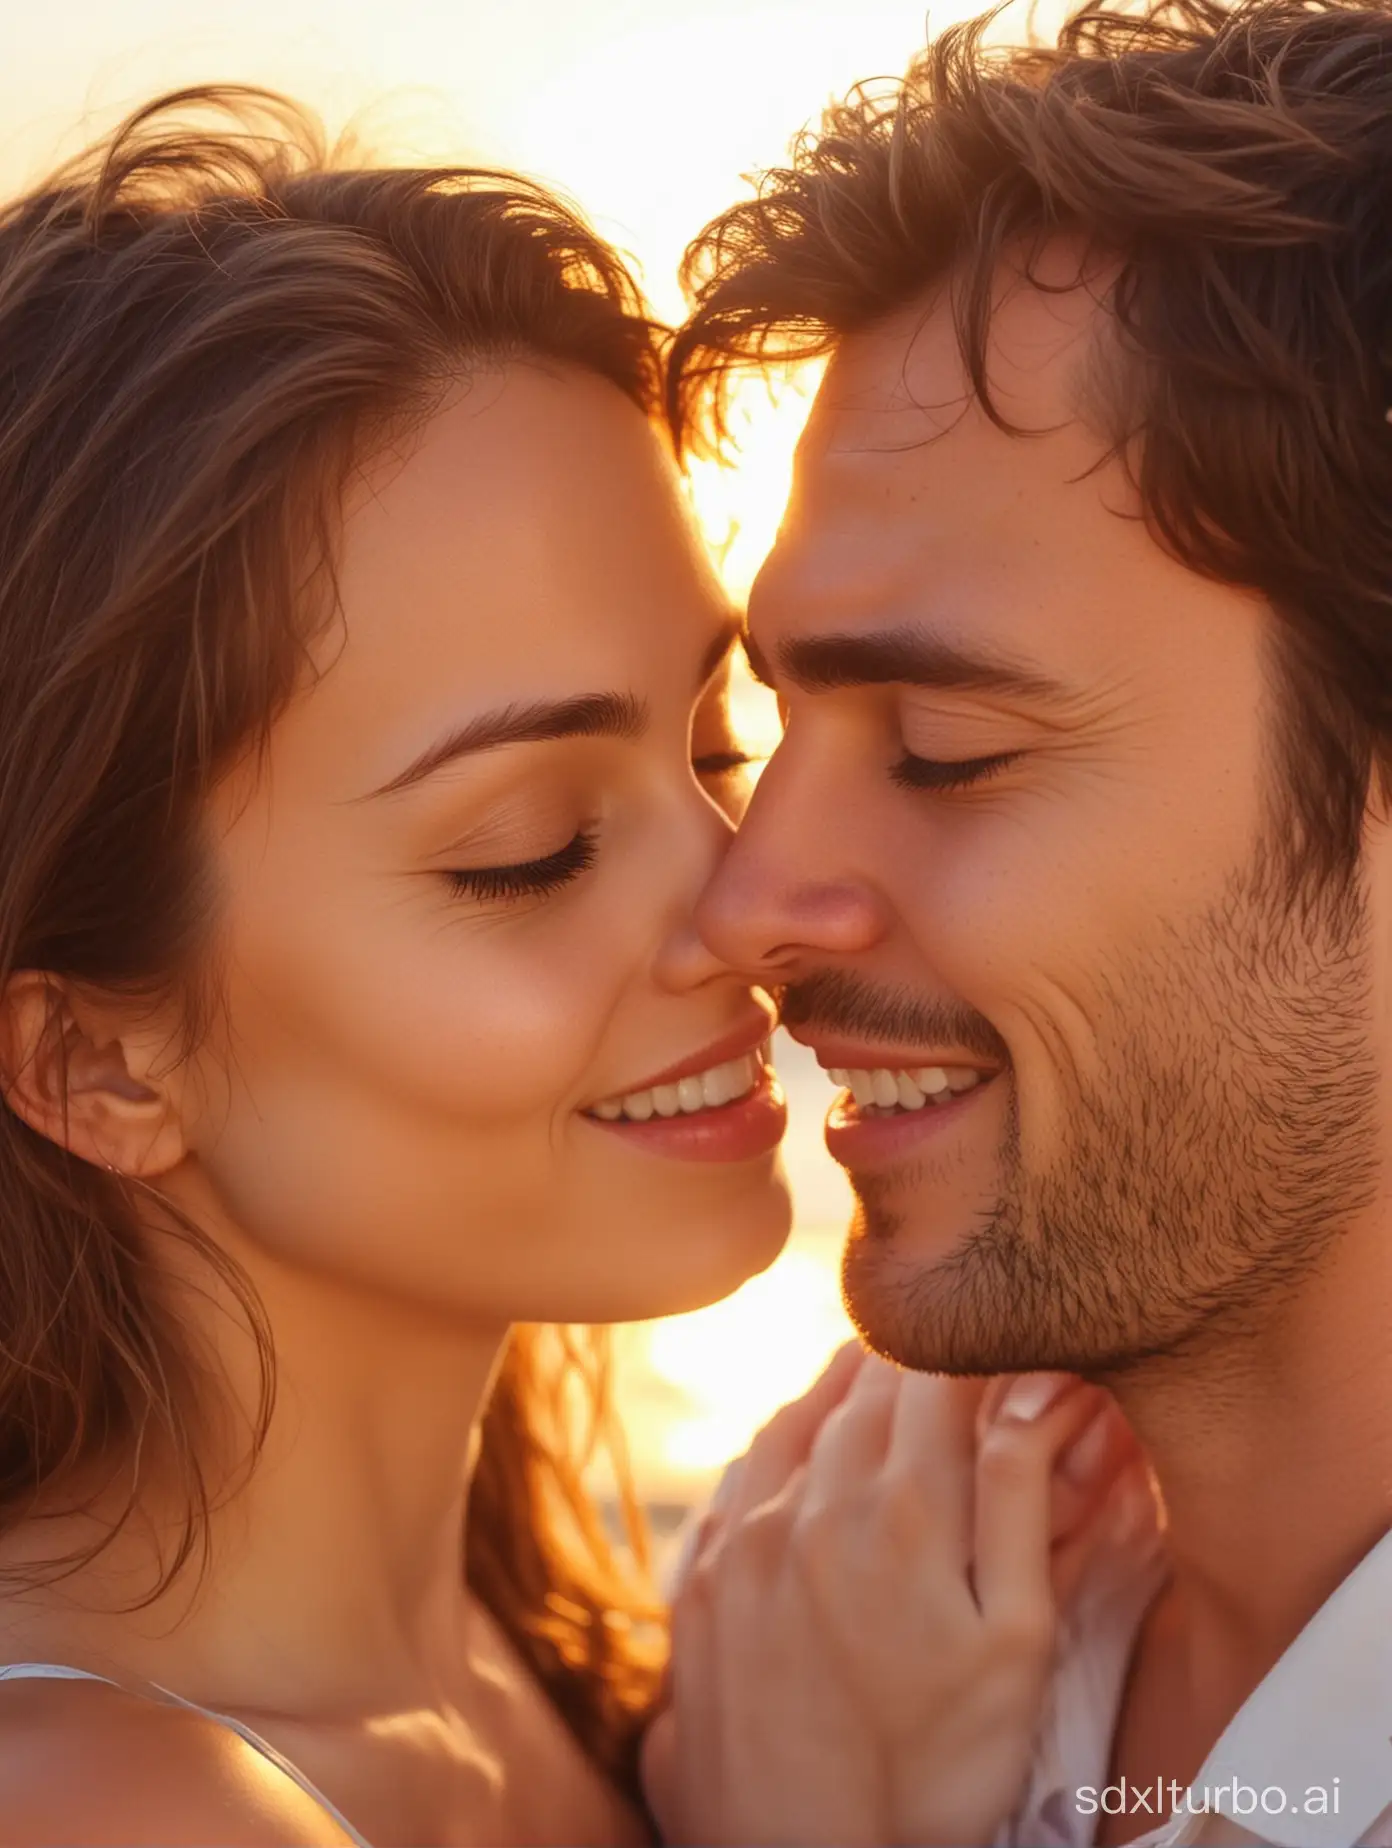 there is a man and woman hugging on the beach at sunset, sun visible between both, close-up, headshot, girl wink